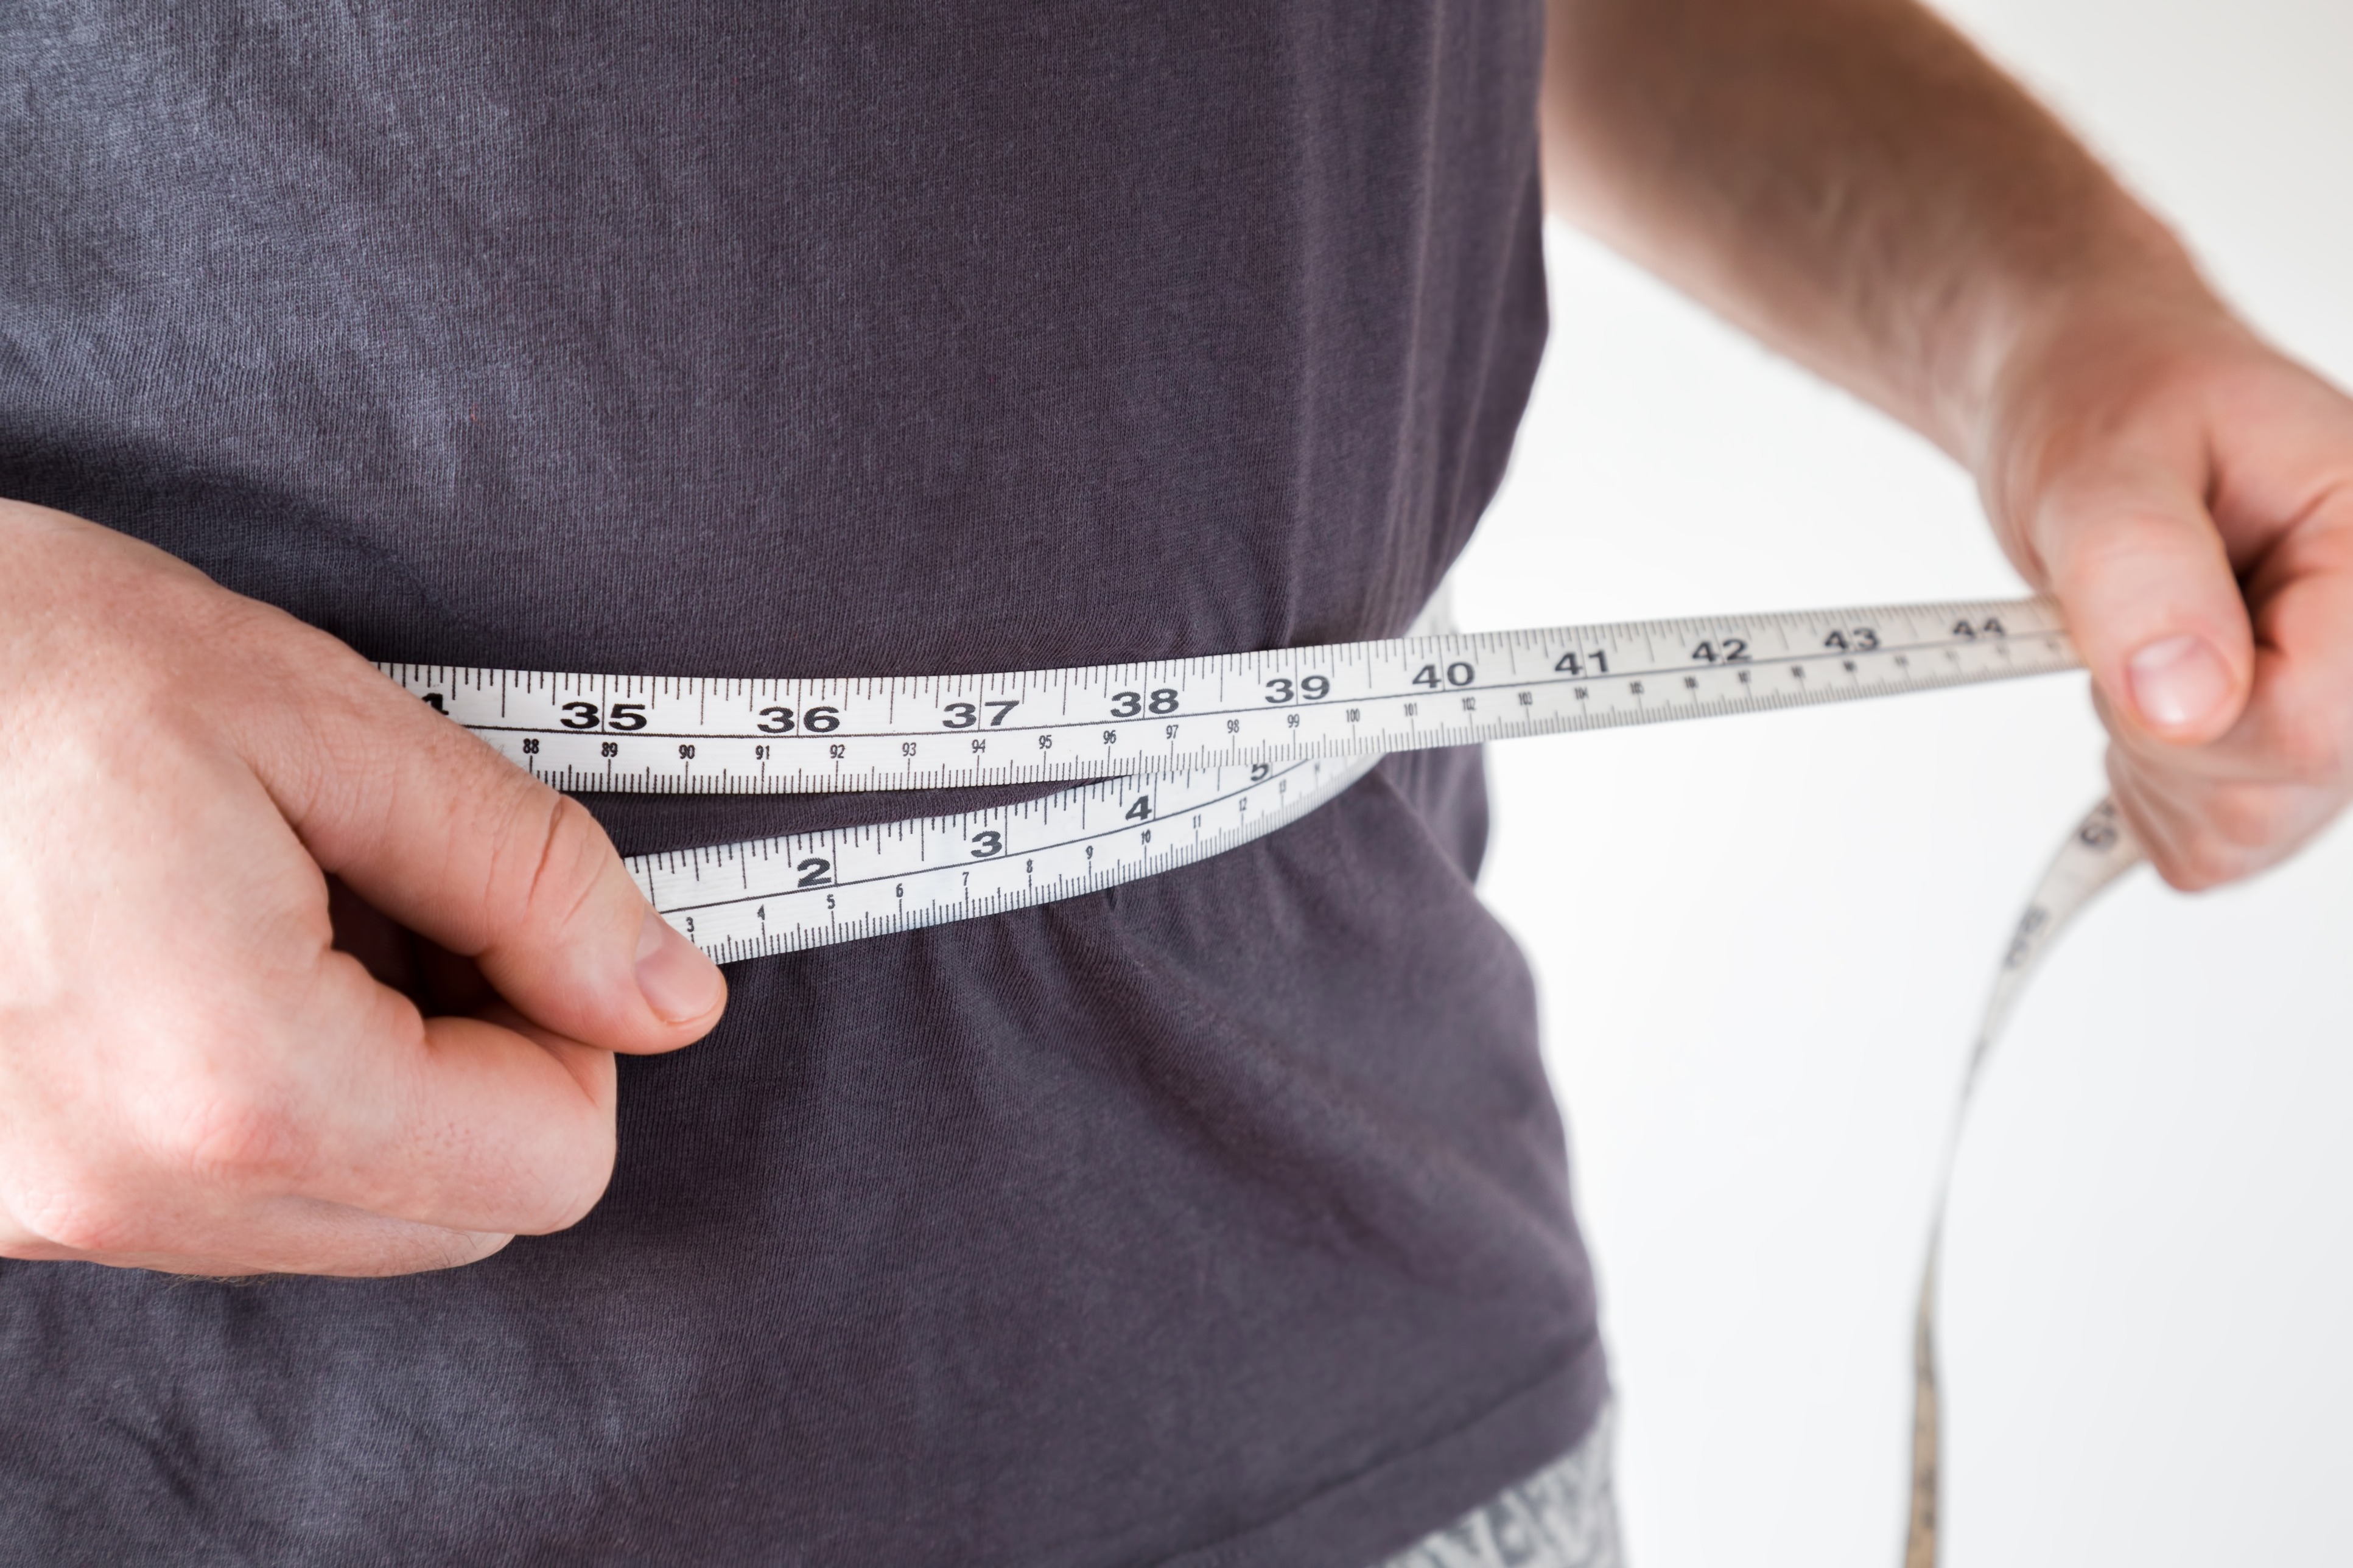 Study shows reduced BMI could mean economic savings and increased workforce productivity